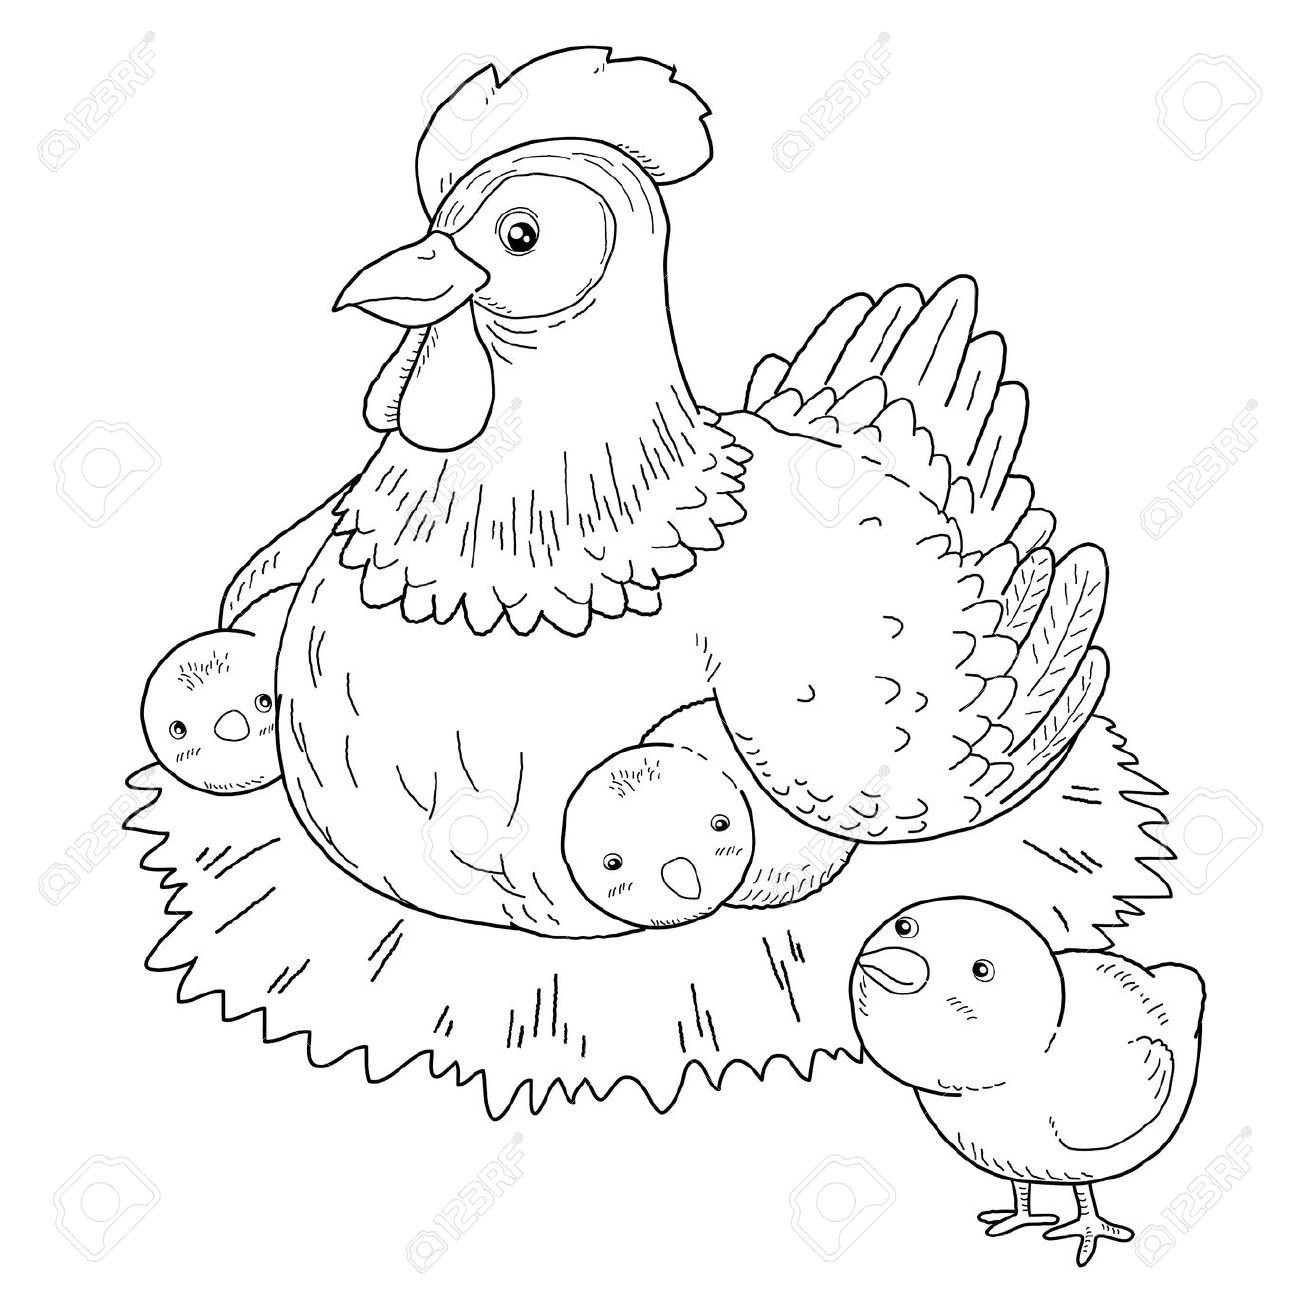 The Little Red Hen Coloring Pages Coloring Ideas The Little Red Hen Coloring Page Free Download